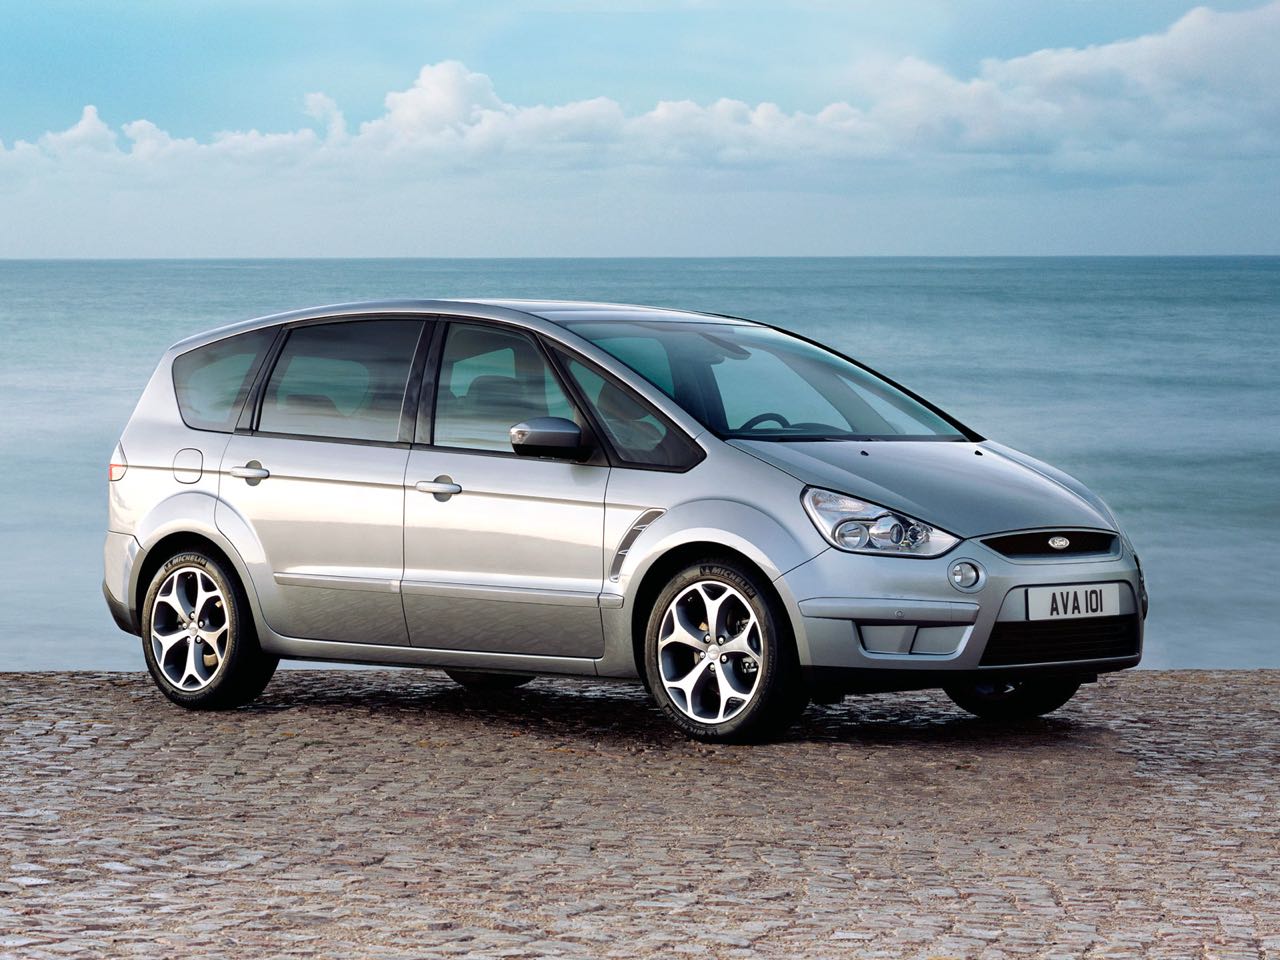 Ford S-Max 2006